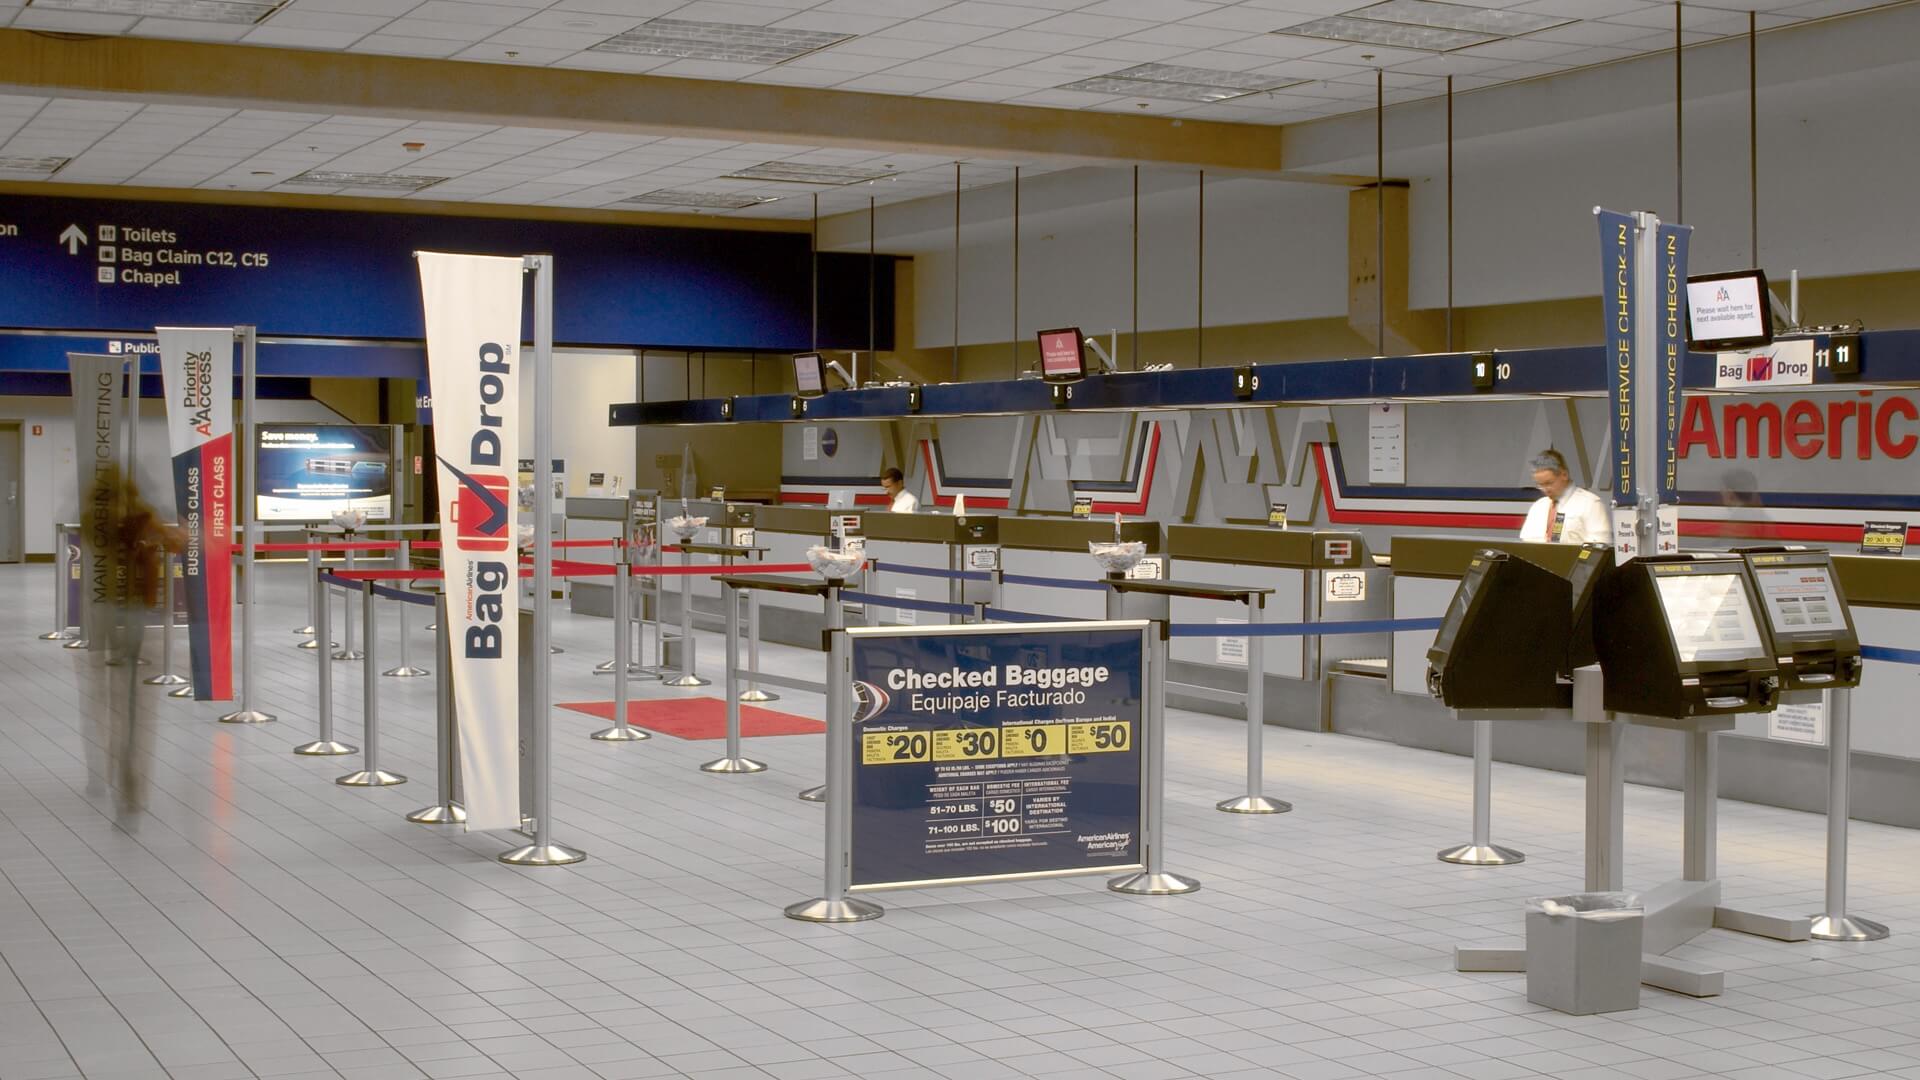 Airport,Technology,Banners,Stanchions,HingedFramePanels,QtracCF,SublimatedBelts,Queuing,Signage